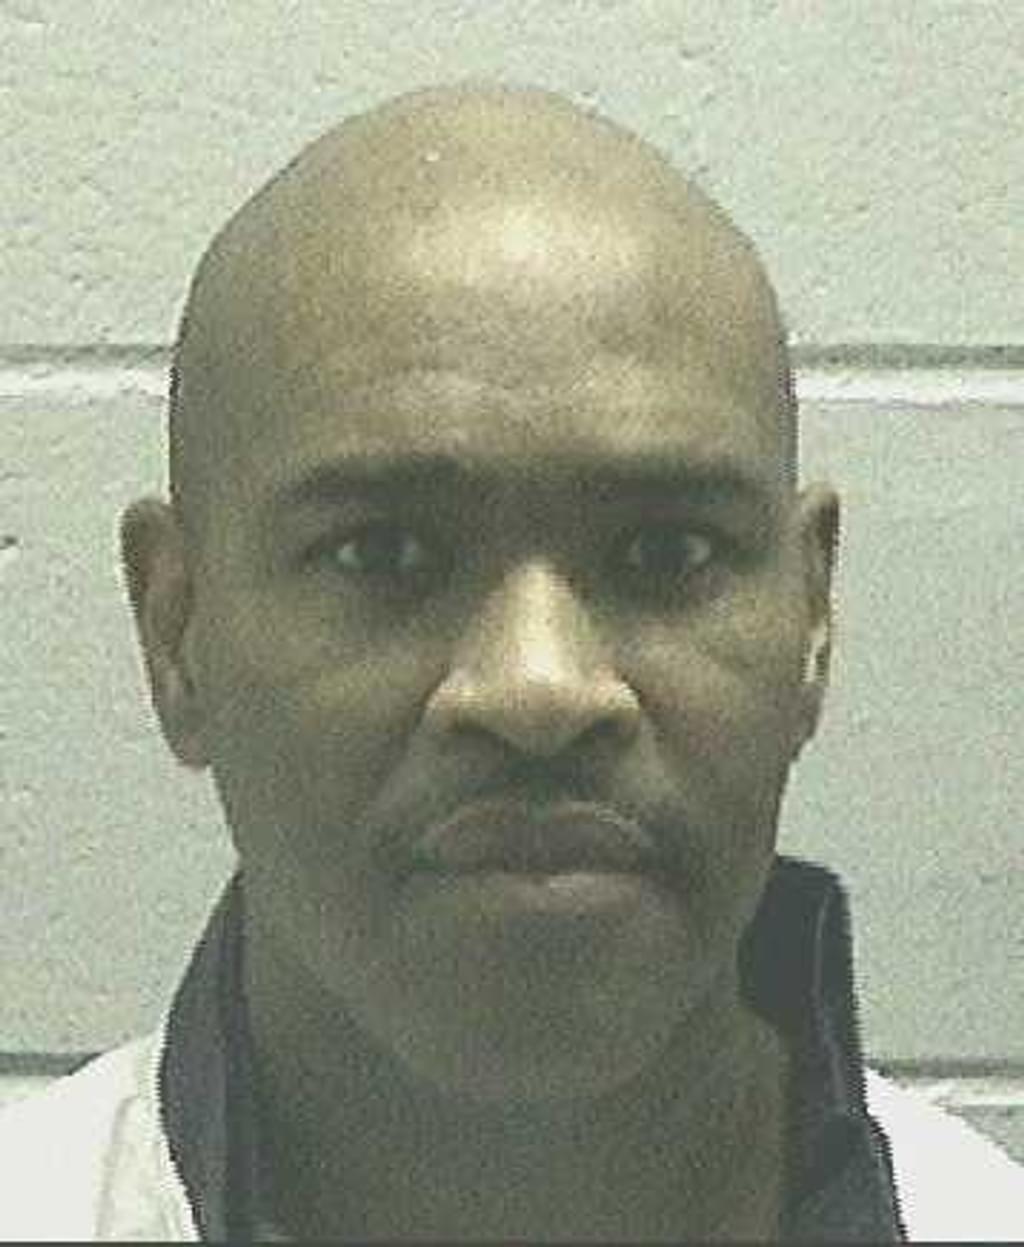 After 3 Trials and Recanted Testimony, Georgia Set to Execute Man Who May Be Innocent